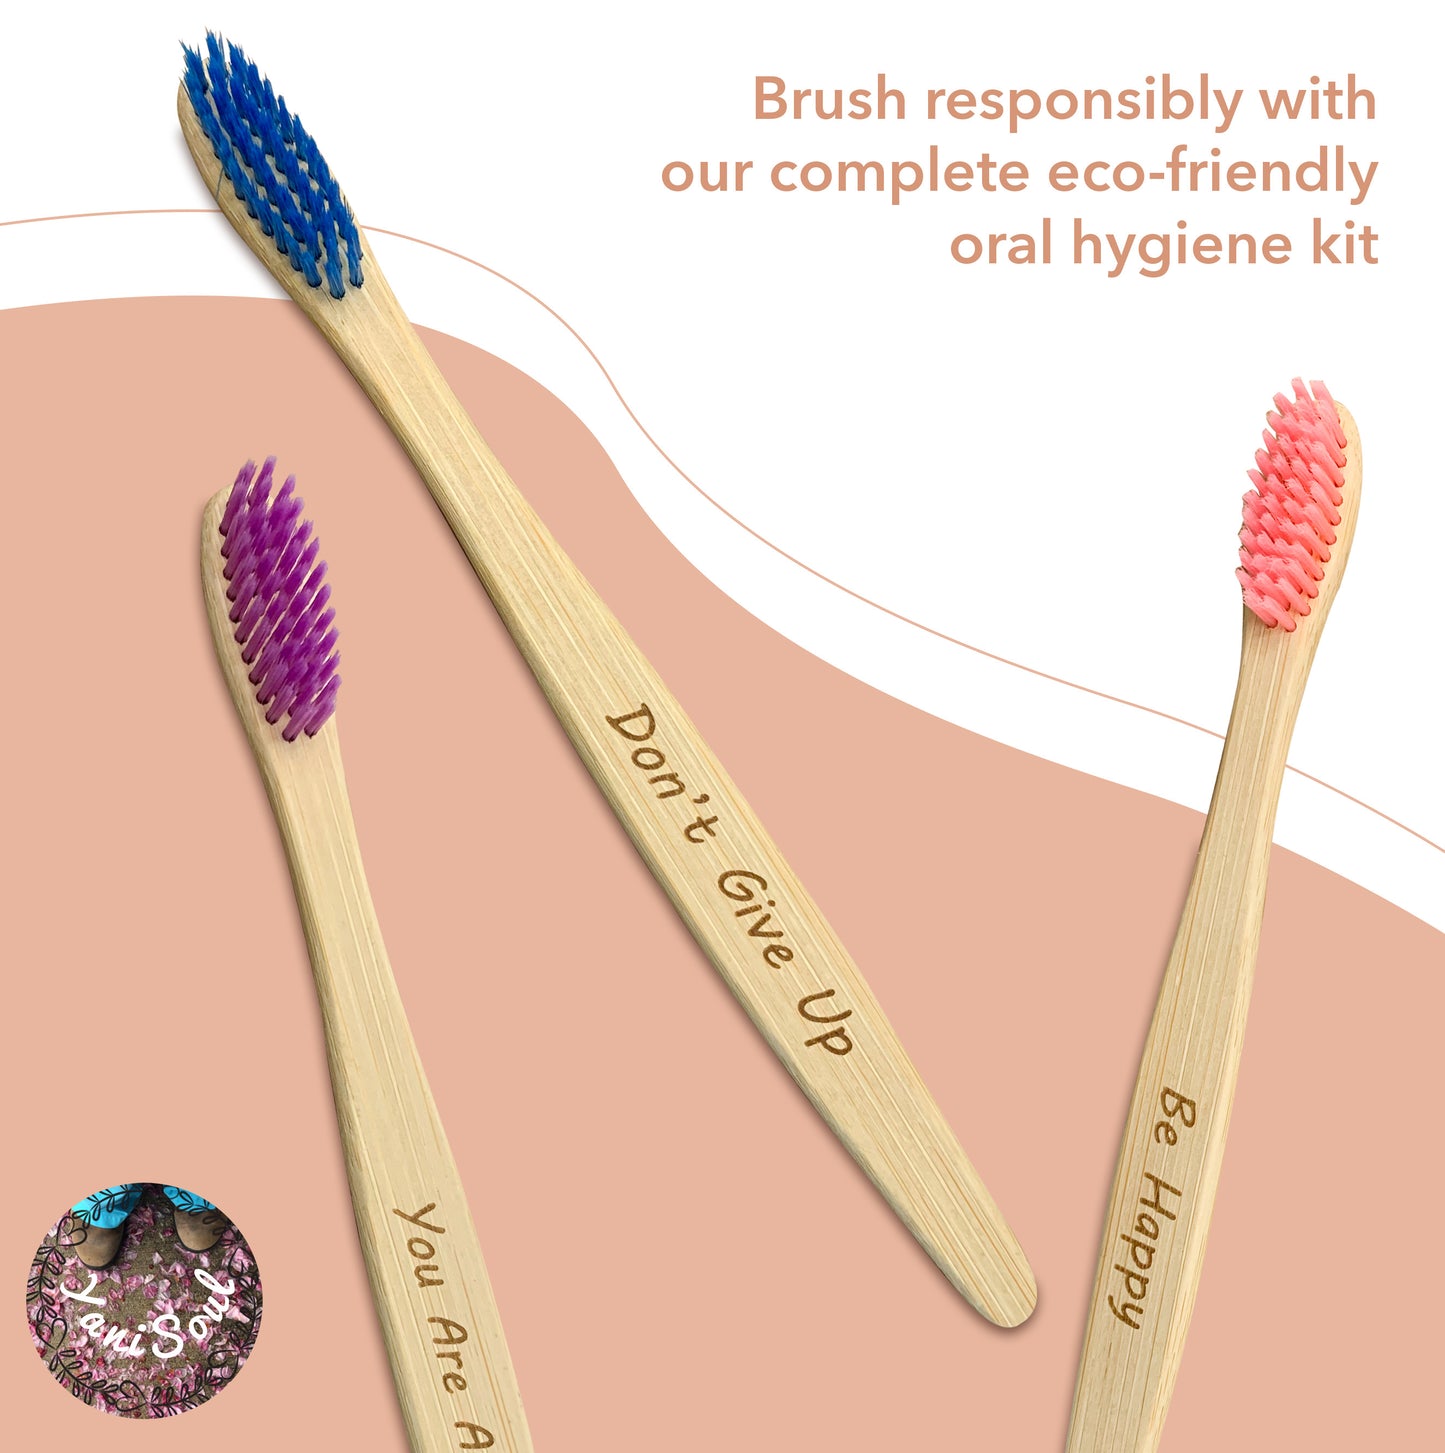 Yani Soul Motivational Biodegradable Bamboo Toothbrush Eco Friendly With Soft Bristles And Vegan Floss Included Change Your Smile, Change The World - Start your day out right with Yani Soul!